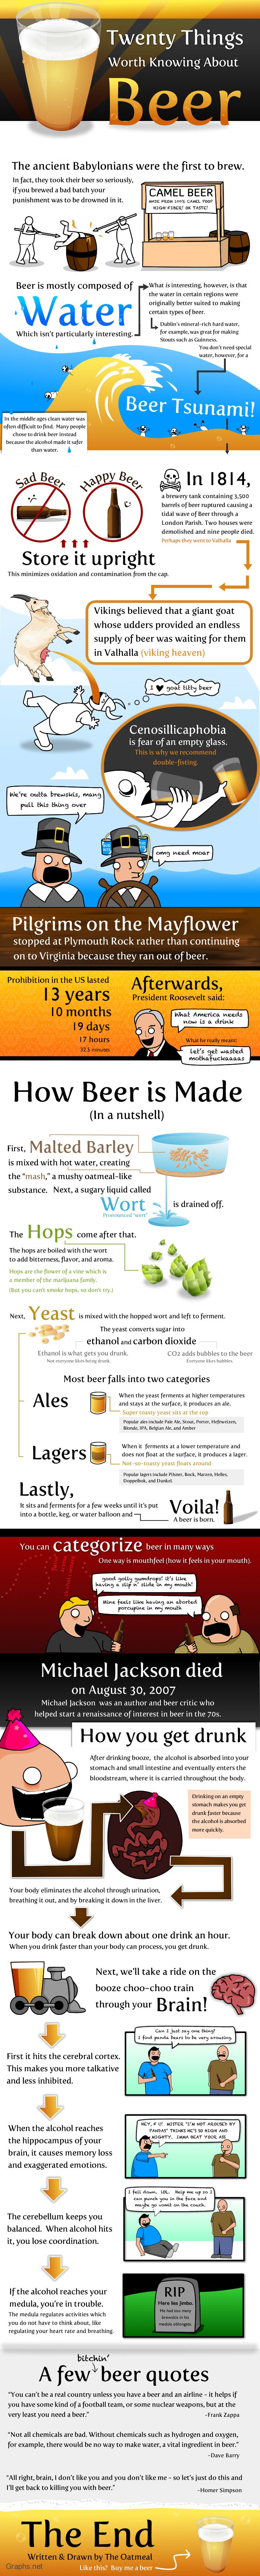 Interesting facts about Beer